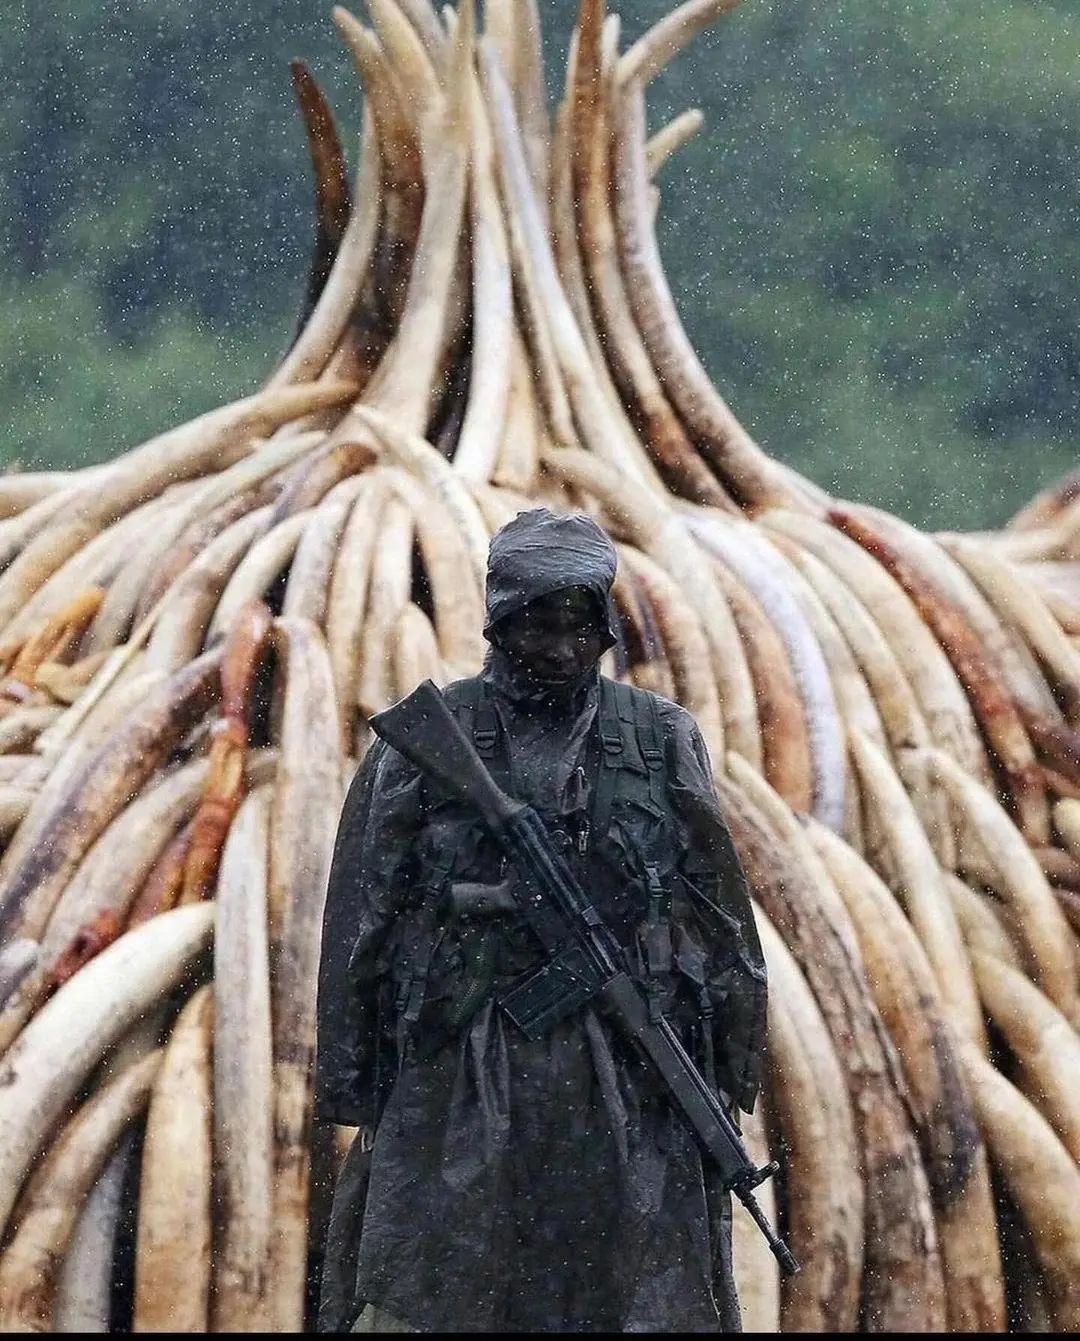 In 2016 President Kenyatta of Kenya sets fires to biggest stockpile of ivory tusks ever destroyed, in statement against ivory trade and poaching.  #fyp #real #hard 